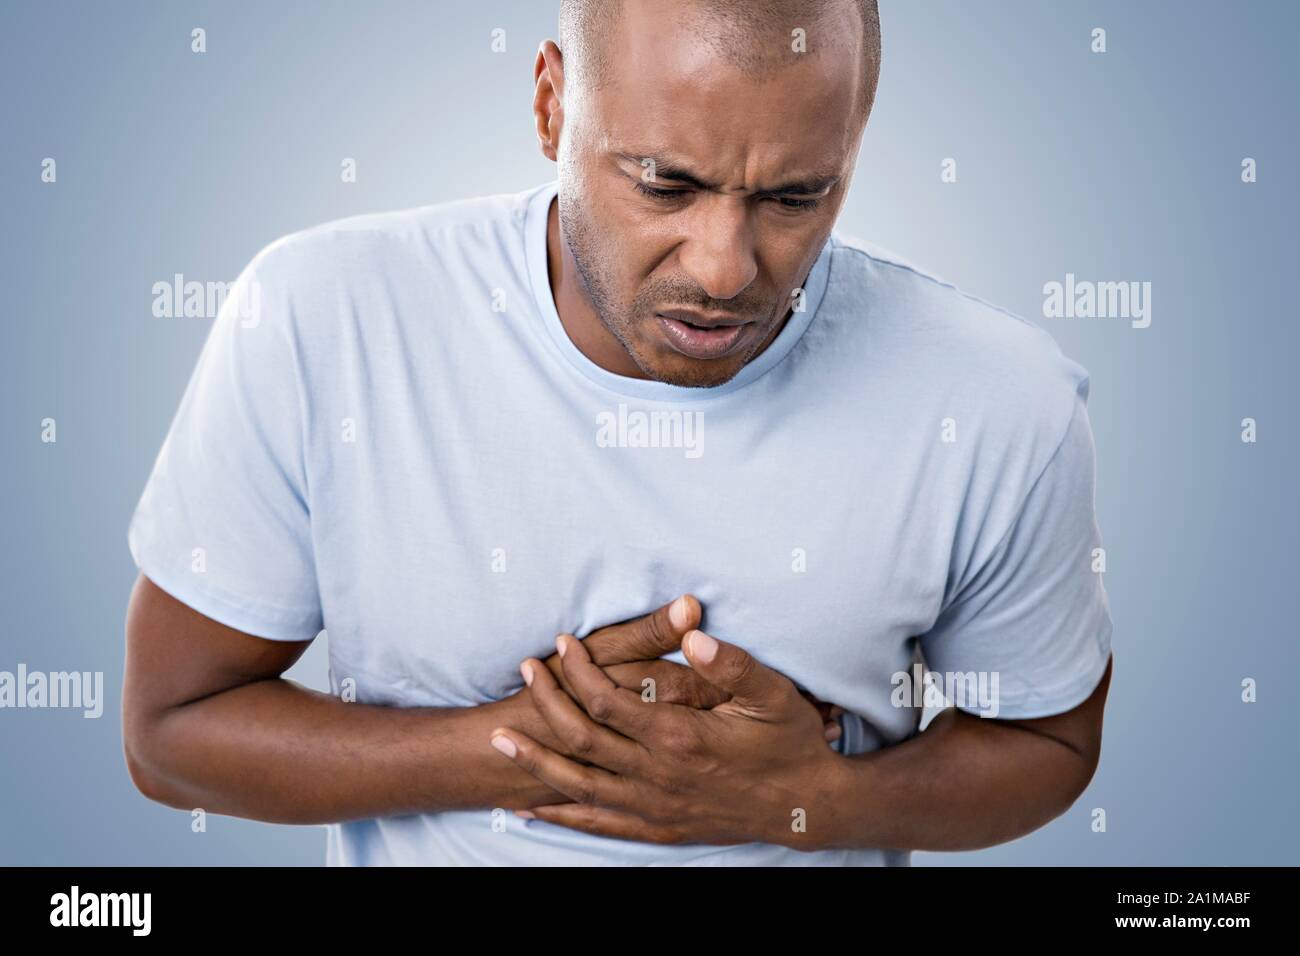 Man clutching his chest in pain. Stock Photo